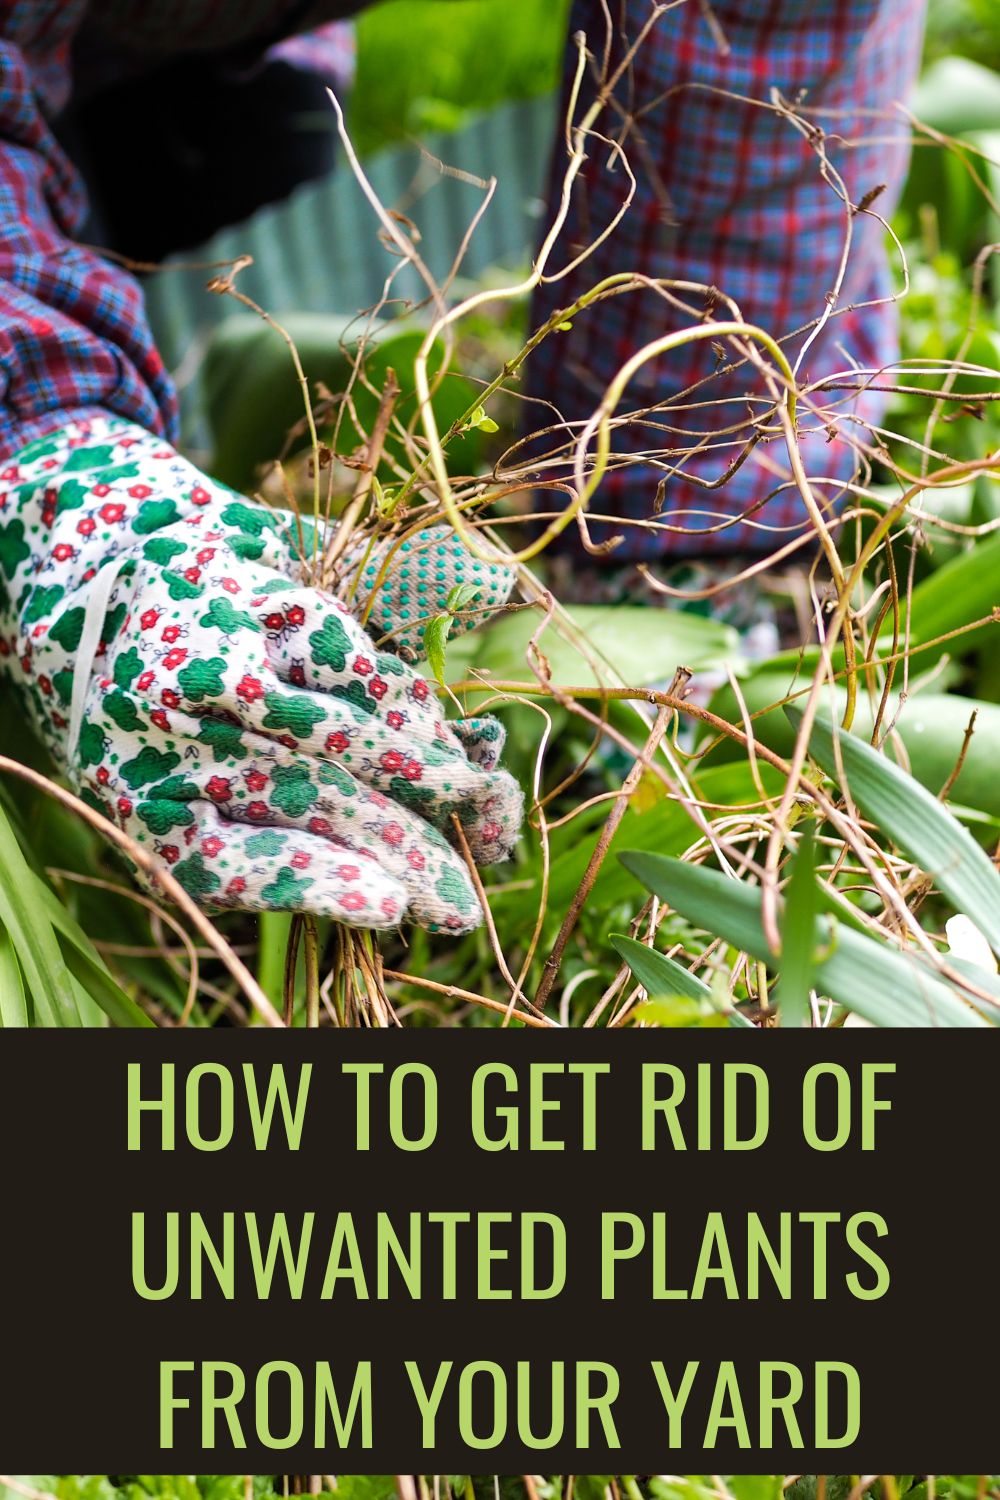 How to get rid of unwanted plants from your yard